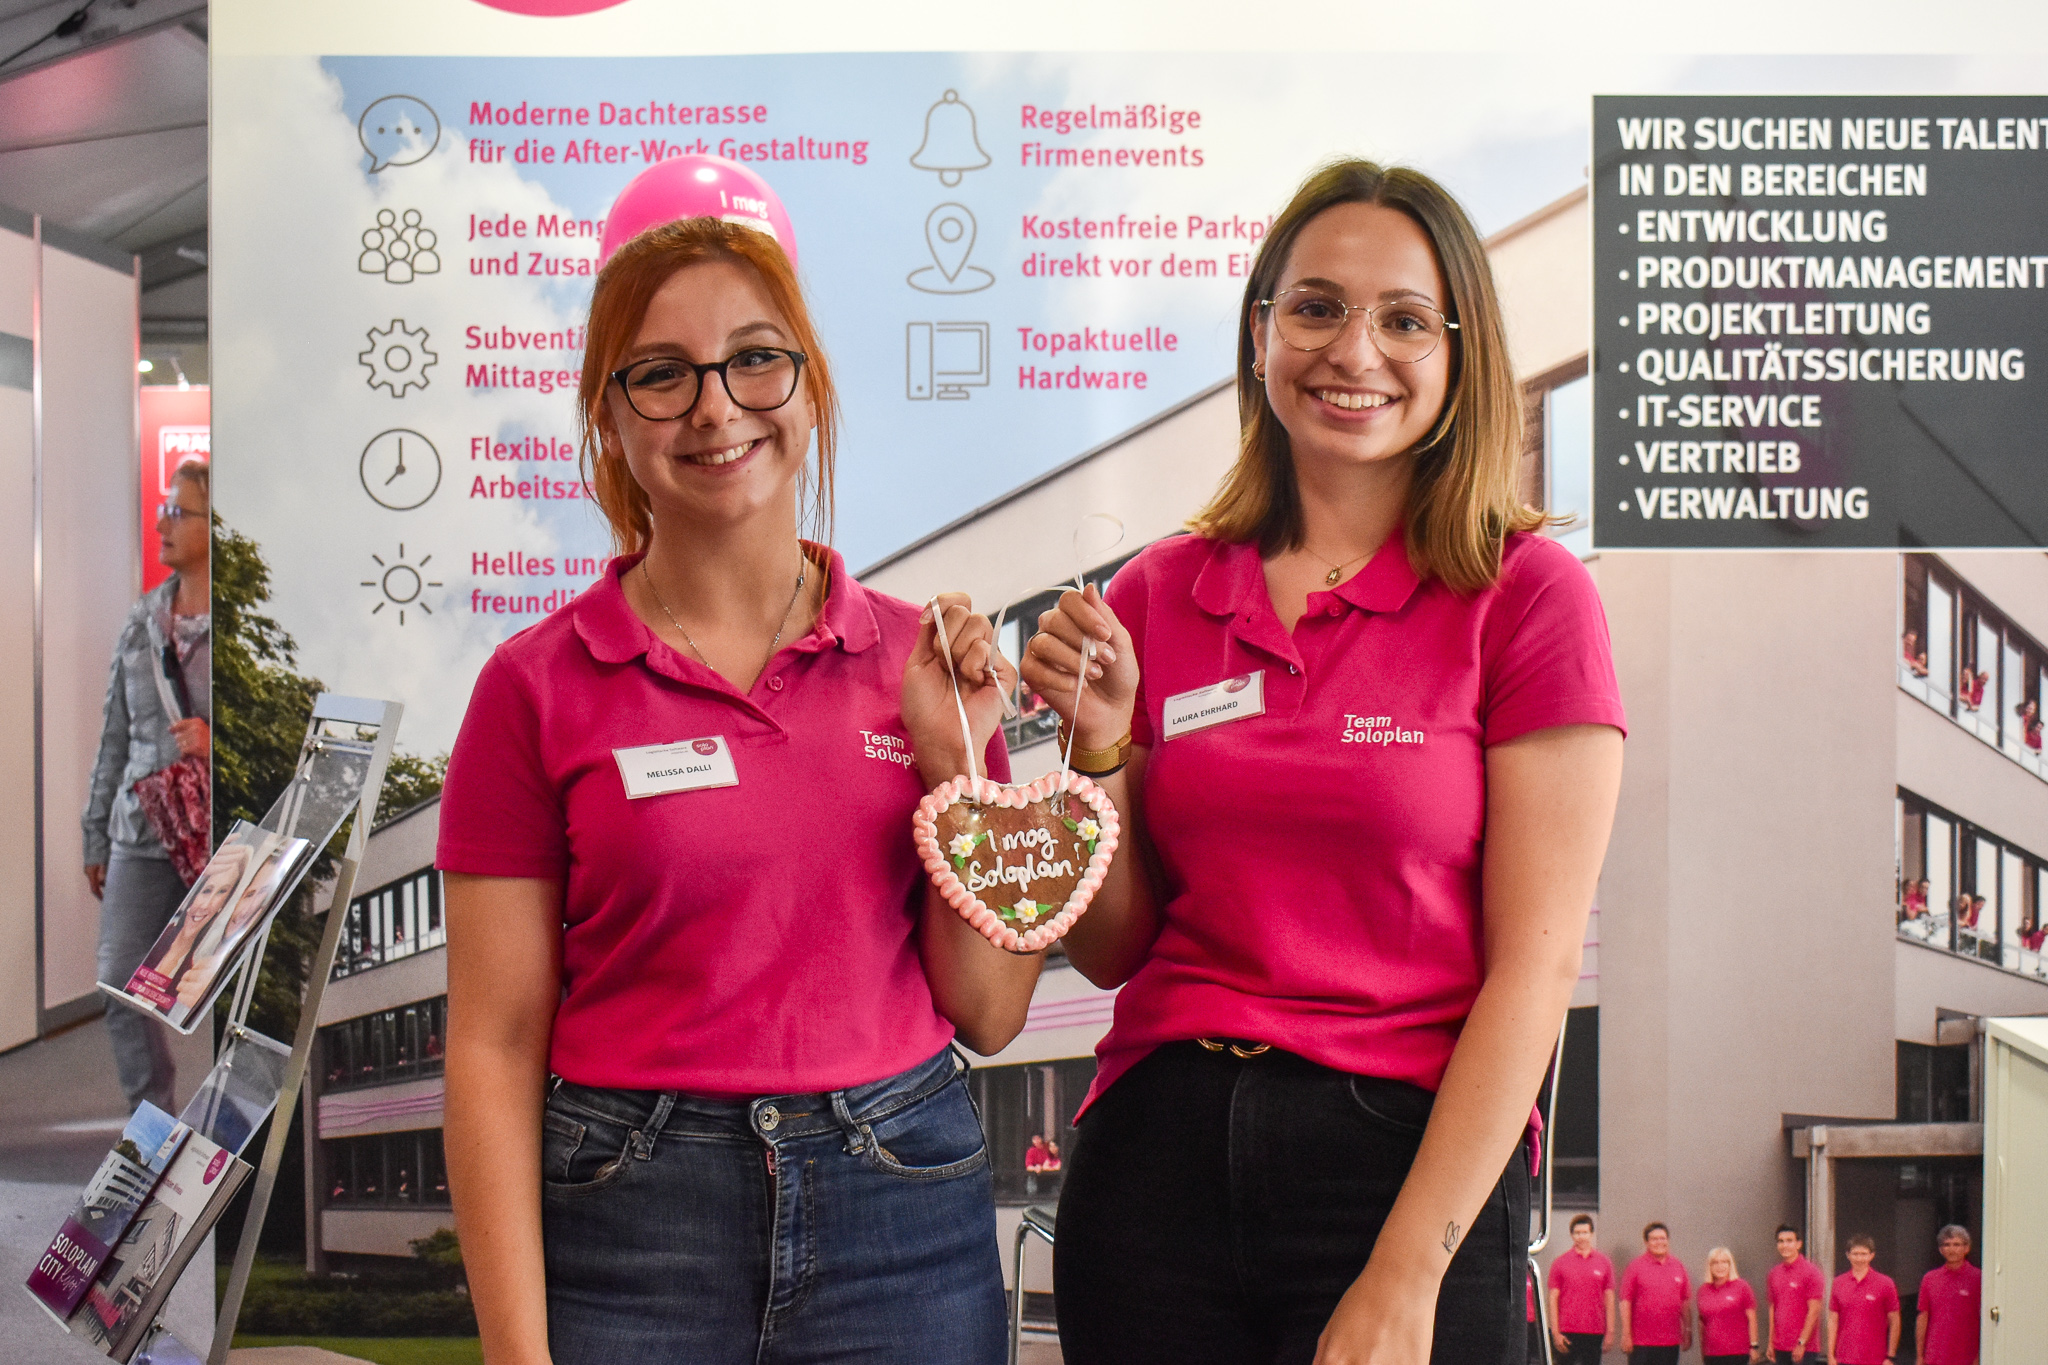 Allgäuer Festwoche: Soloplan informs visitors about career opportunities